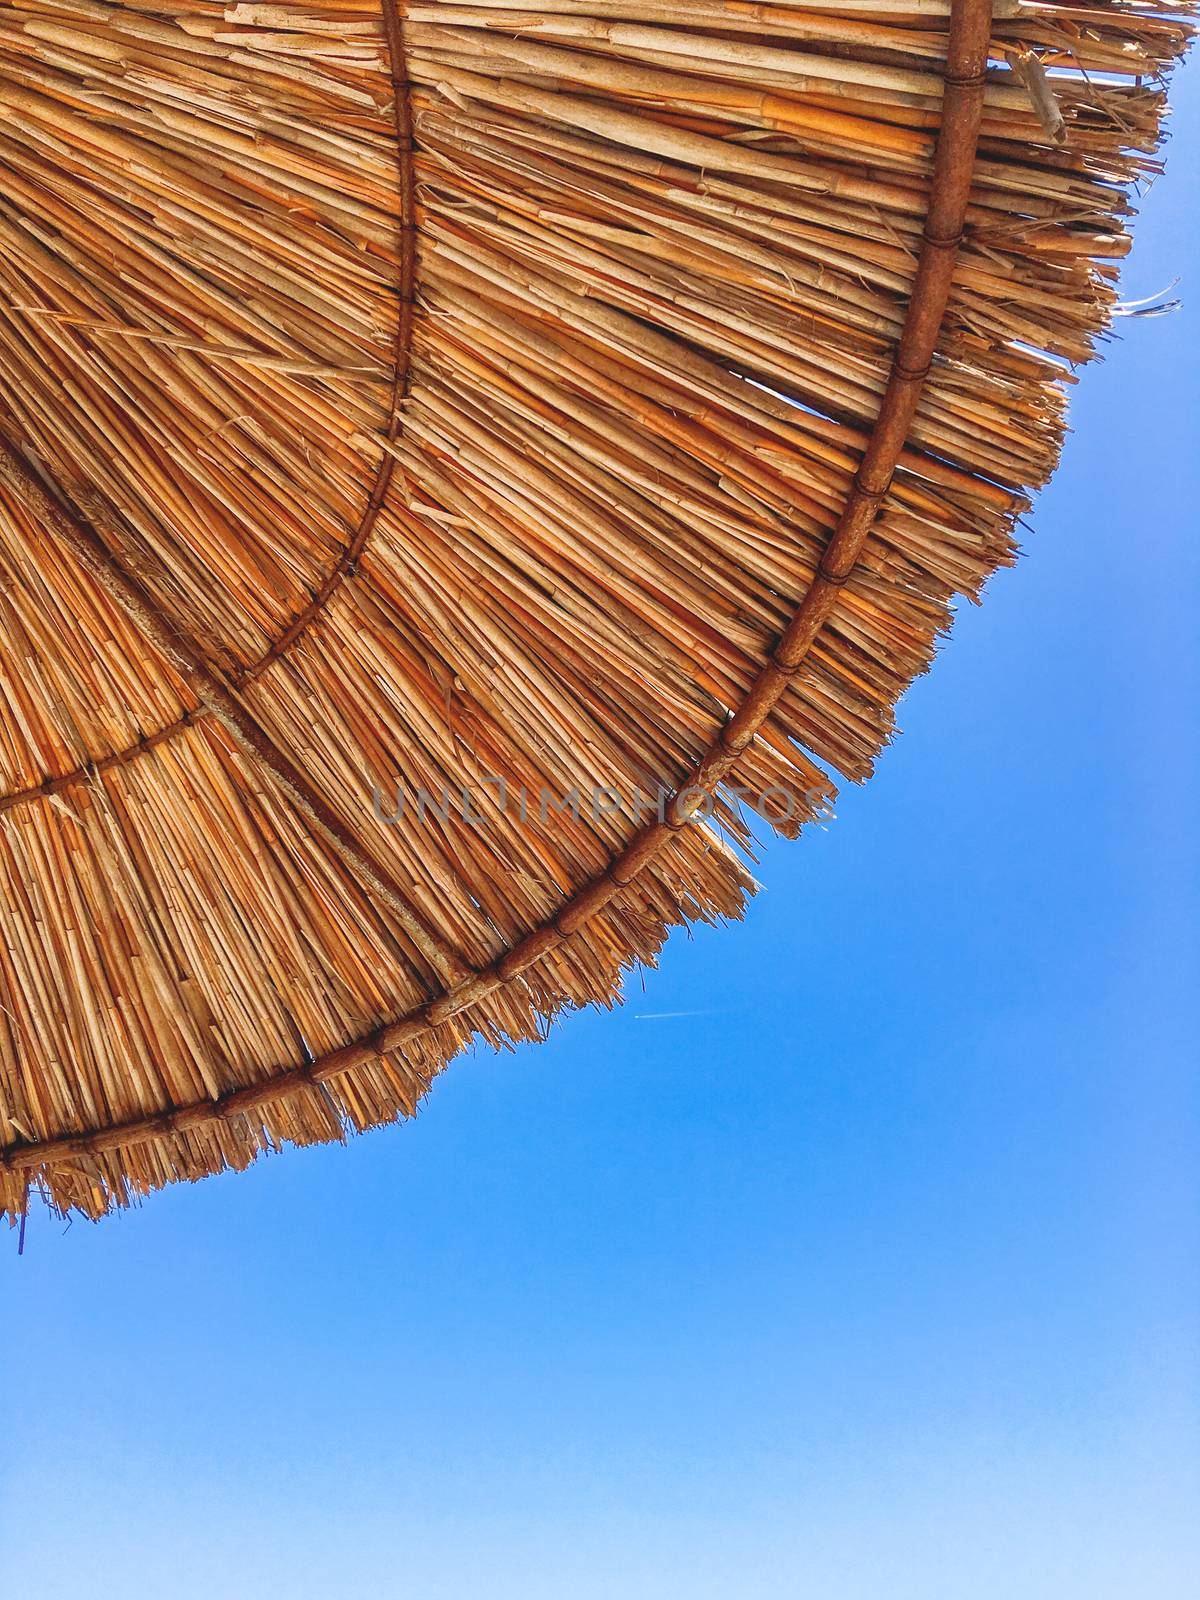 Bottom view of straw beach umbrella on clear blue sky background. Symbol of vacation, rest and relaxation. Kemer, Turkey.